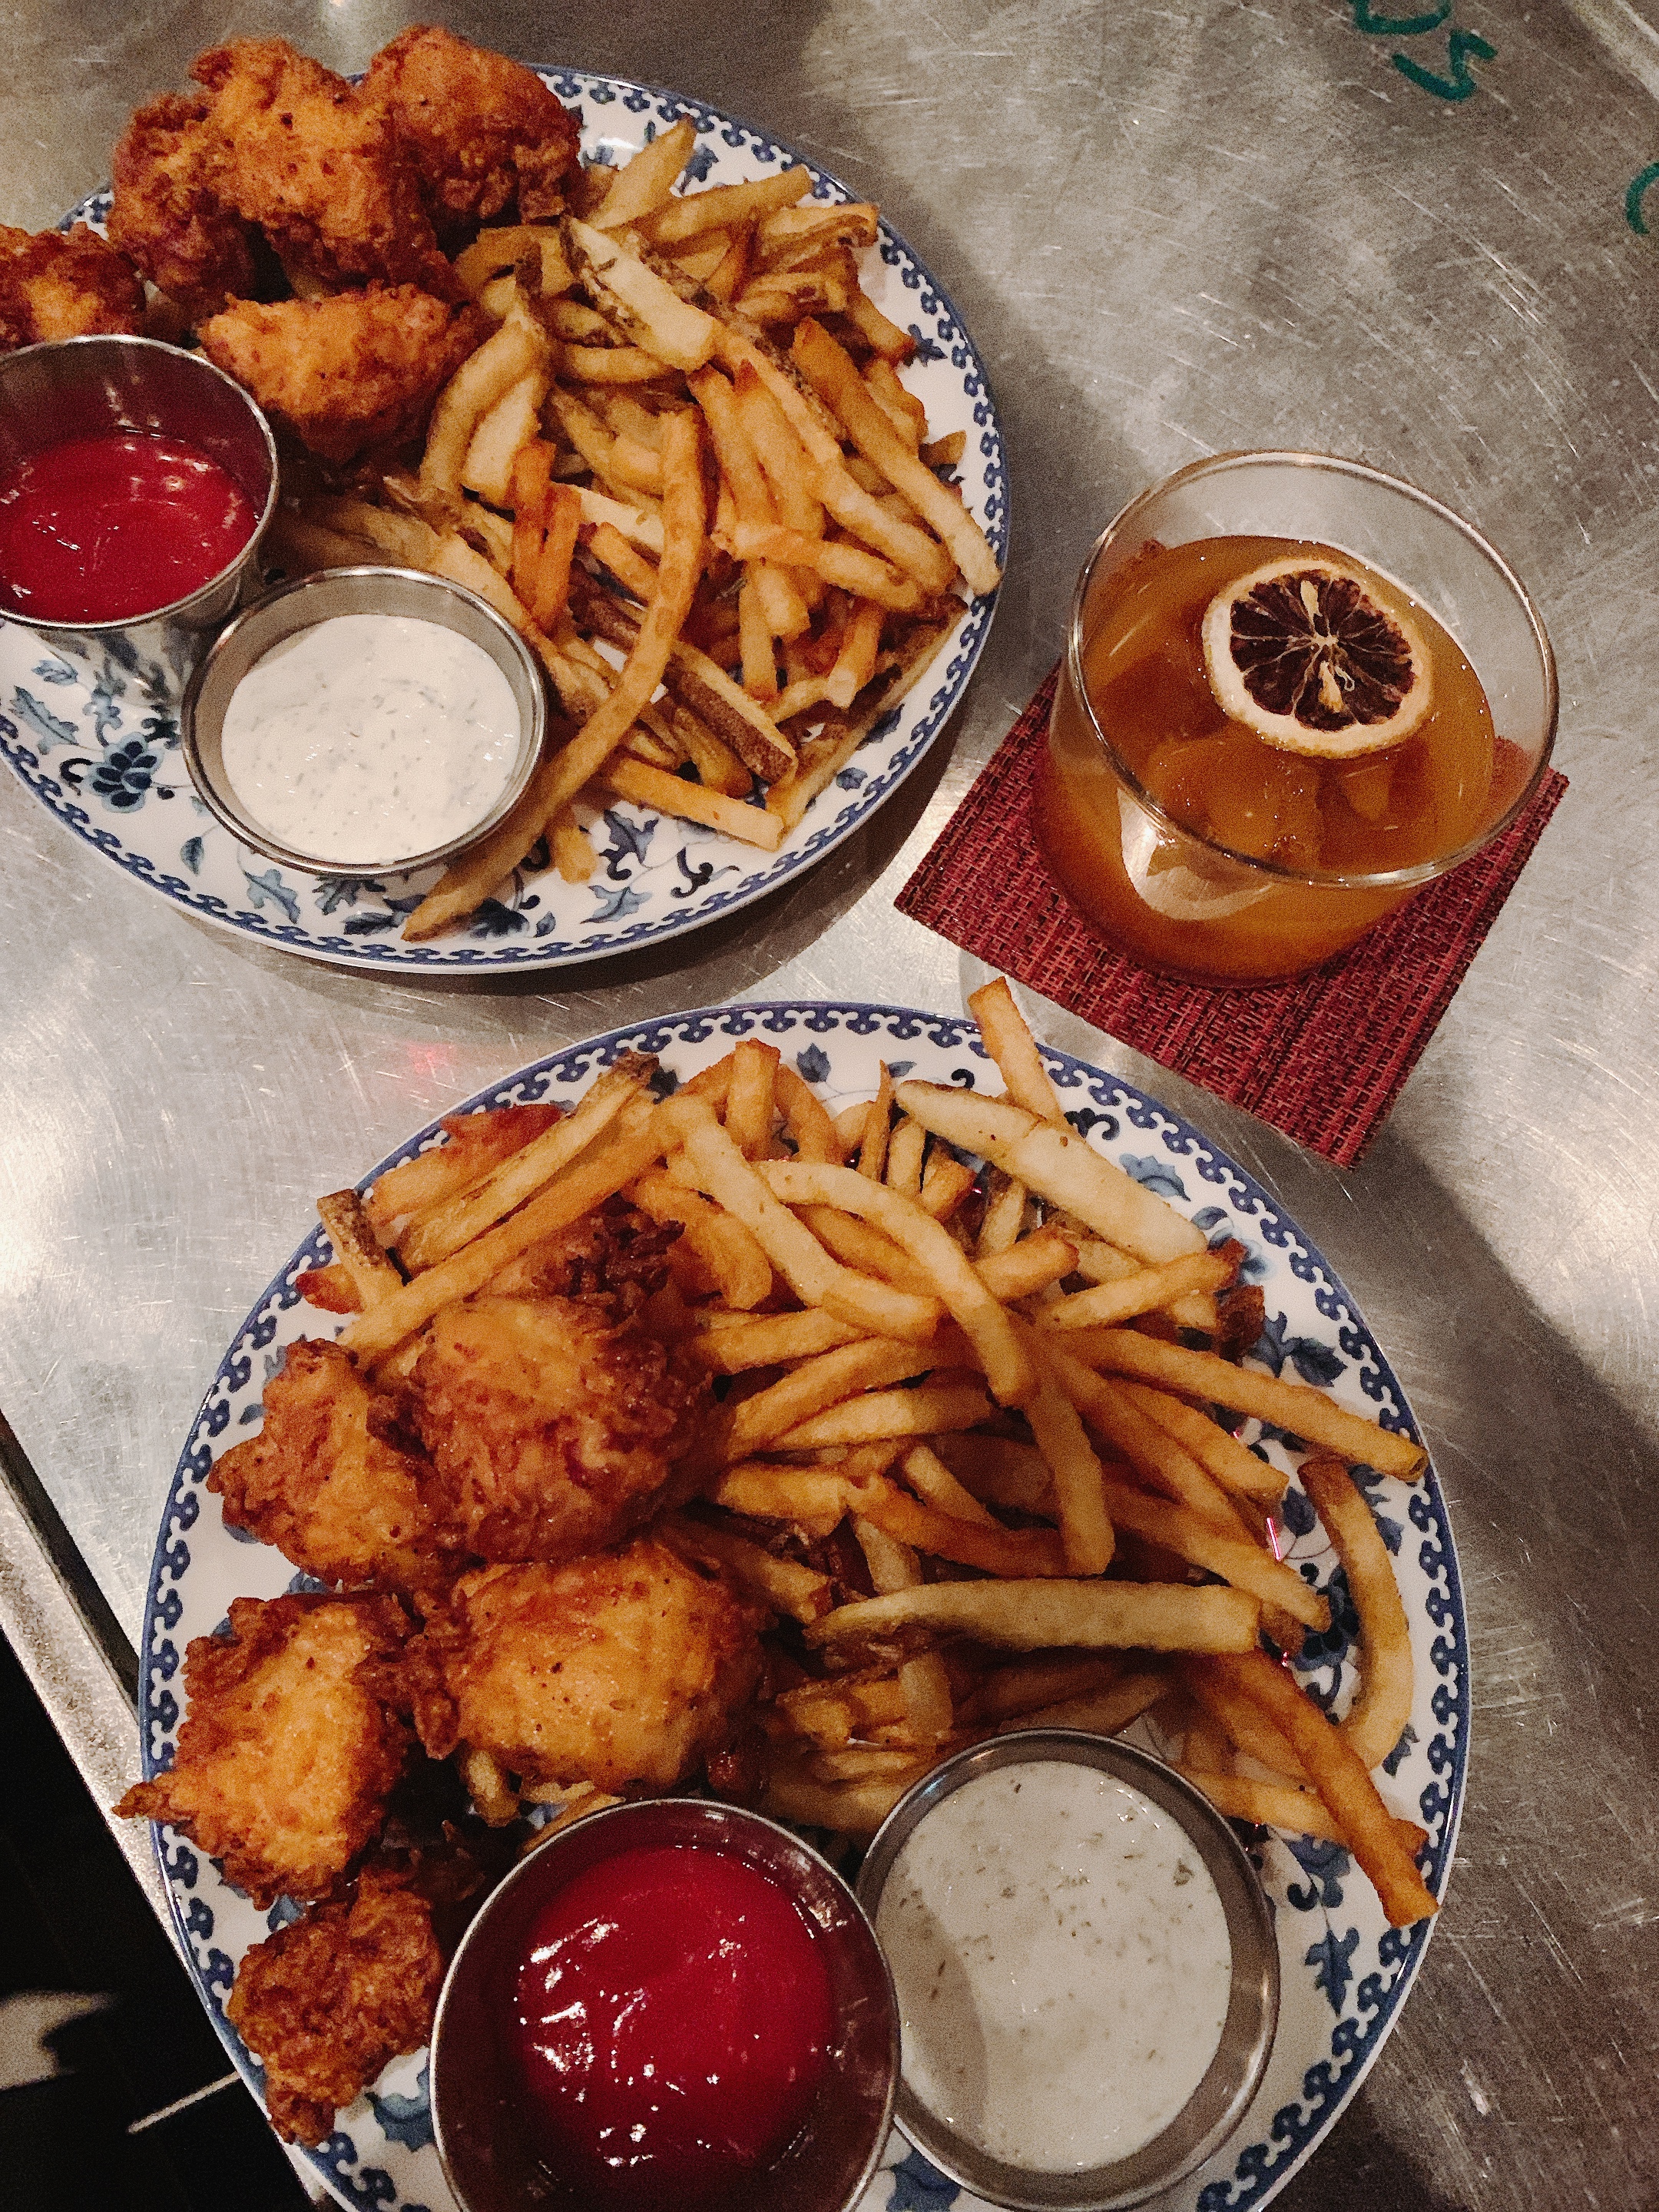 two plates of chicken, fries, and drinks